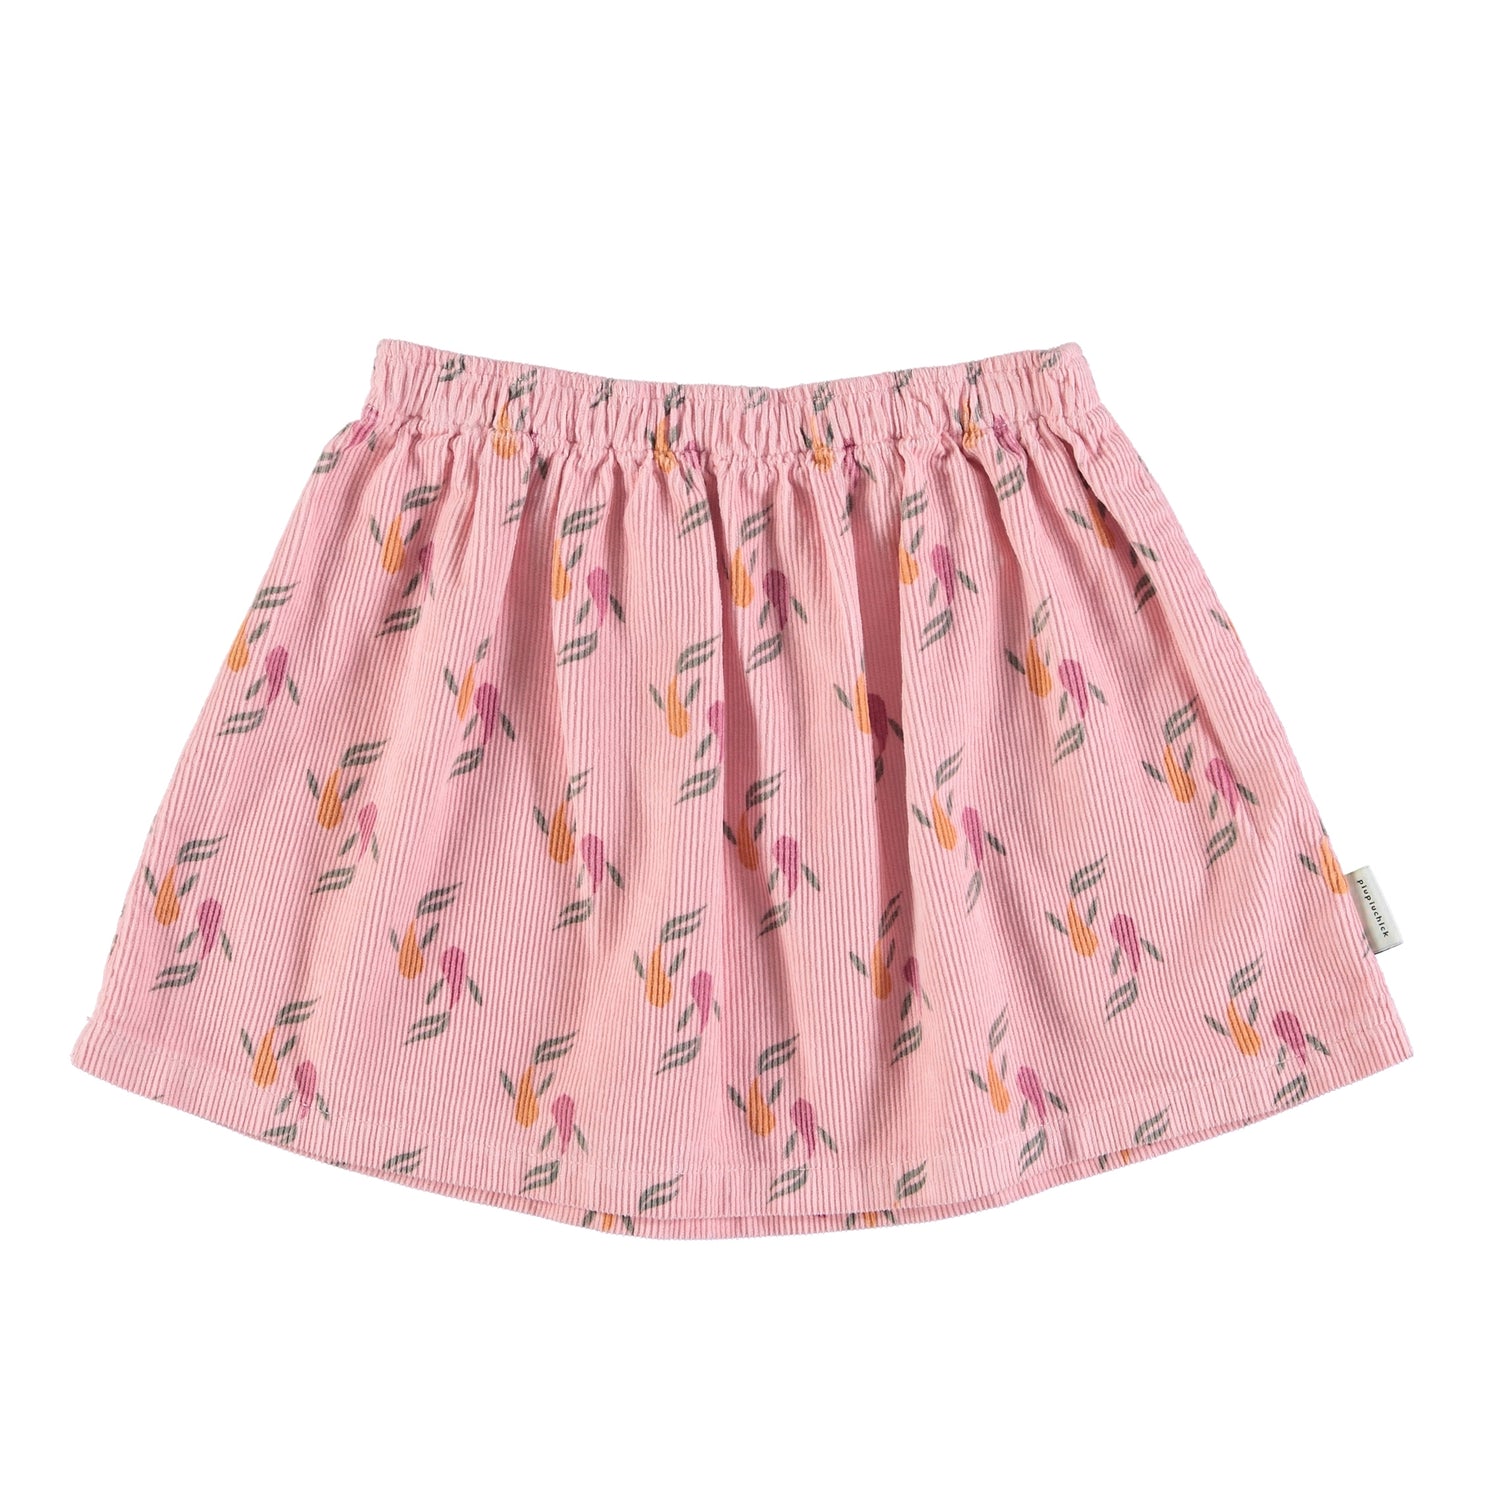 Piupiuchick Pink with Multicolor Fish Short Skirt